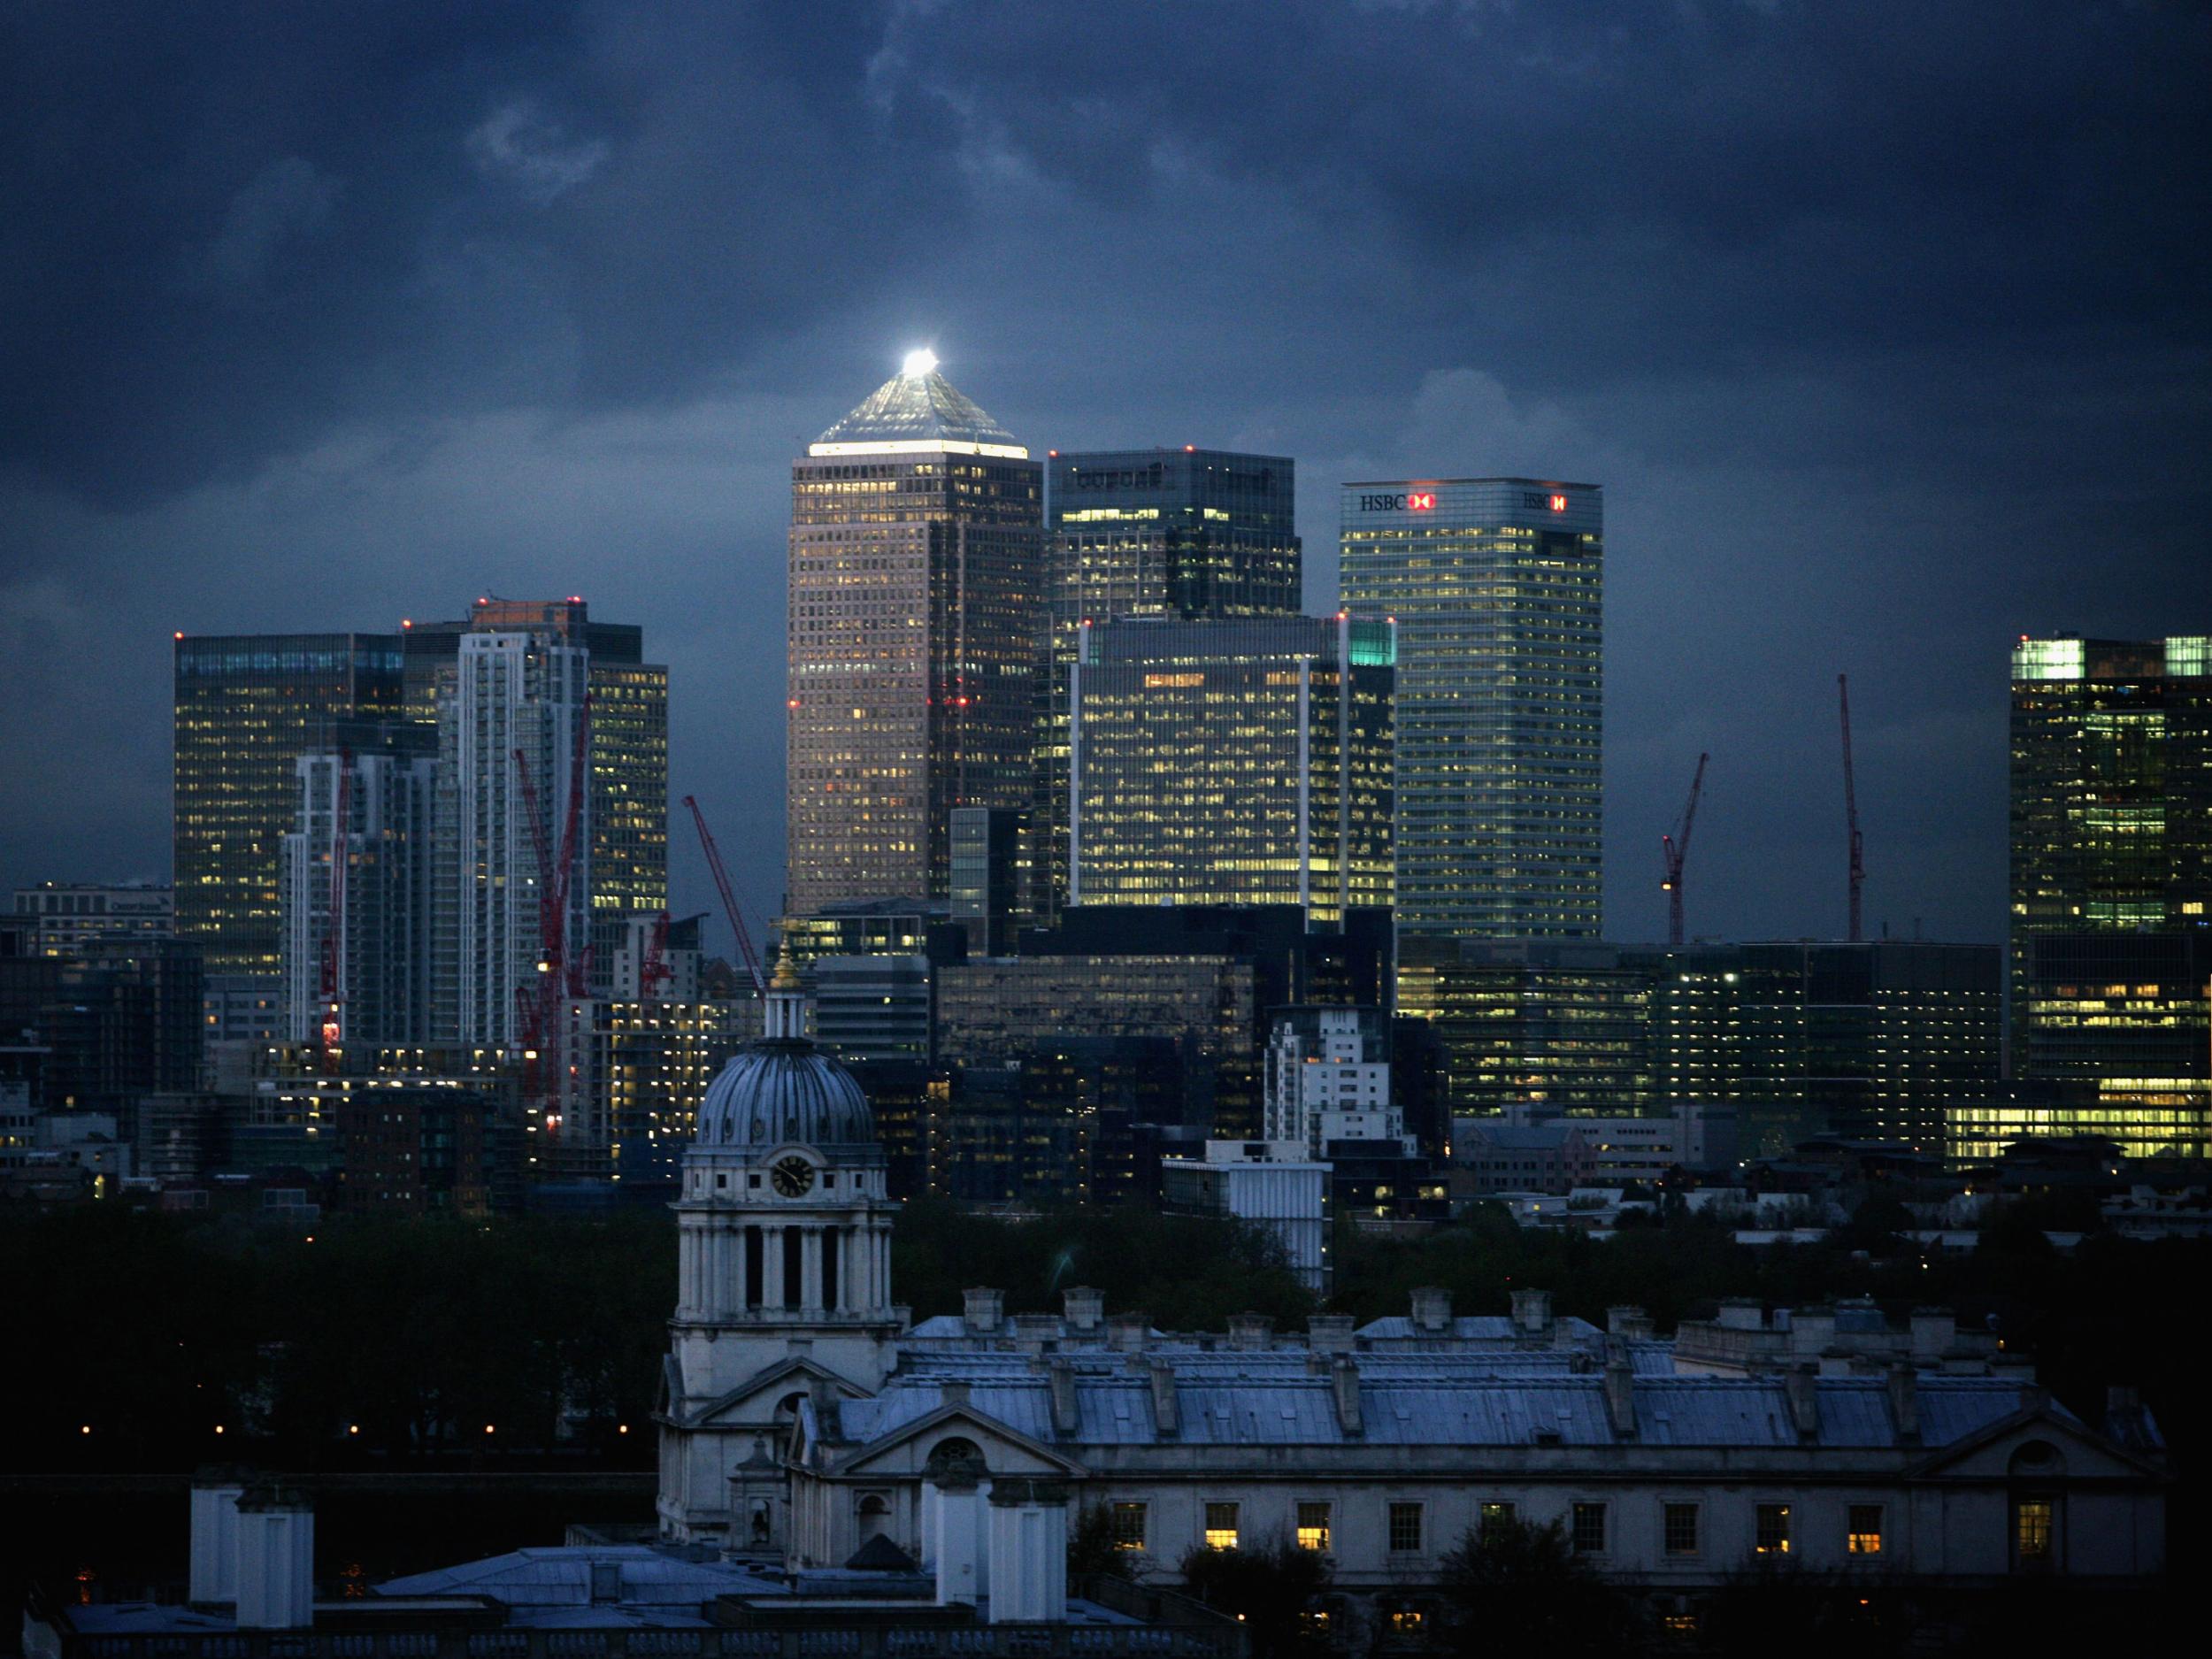 London's financial district, Canary Wharf